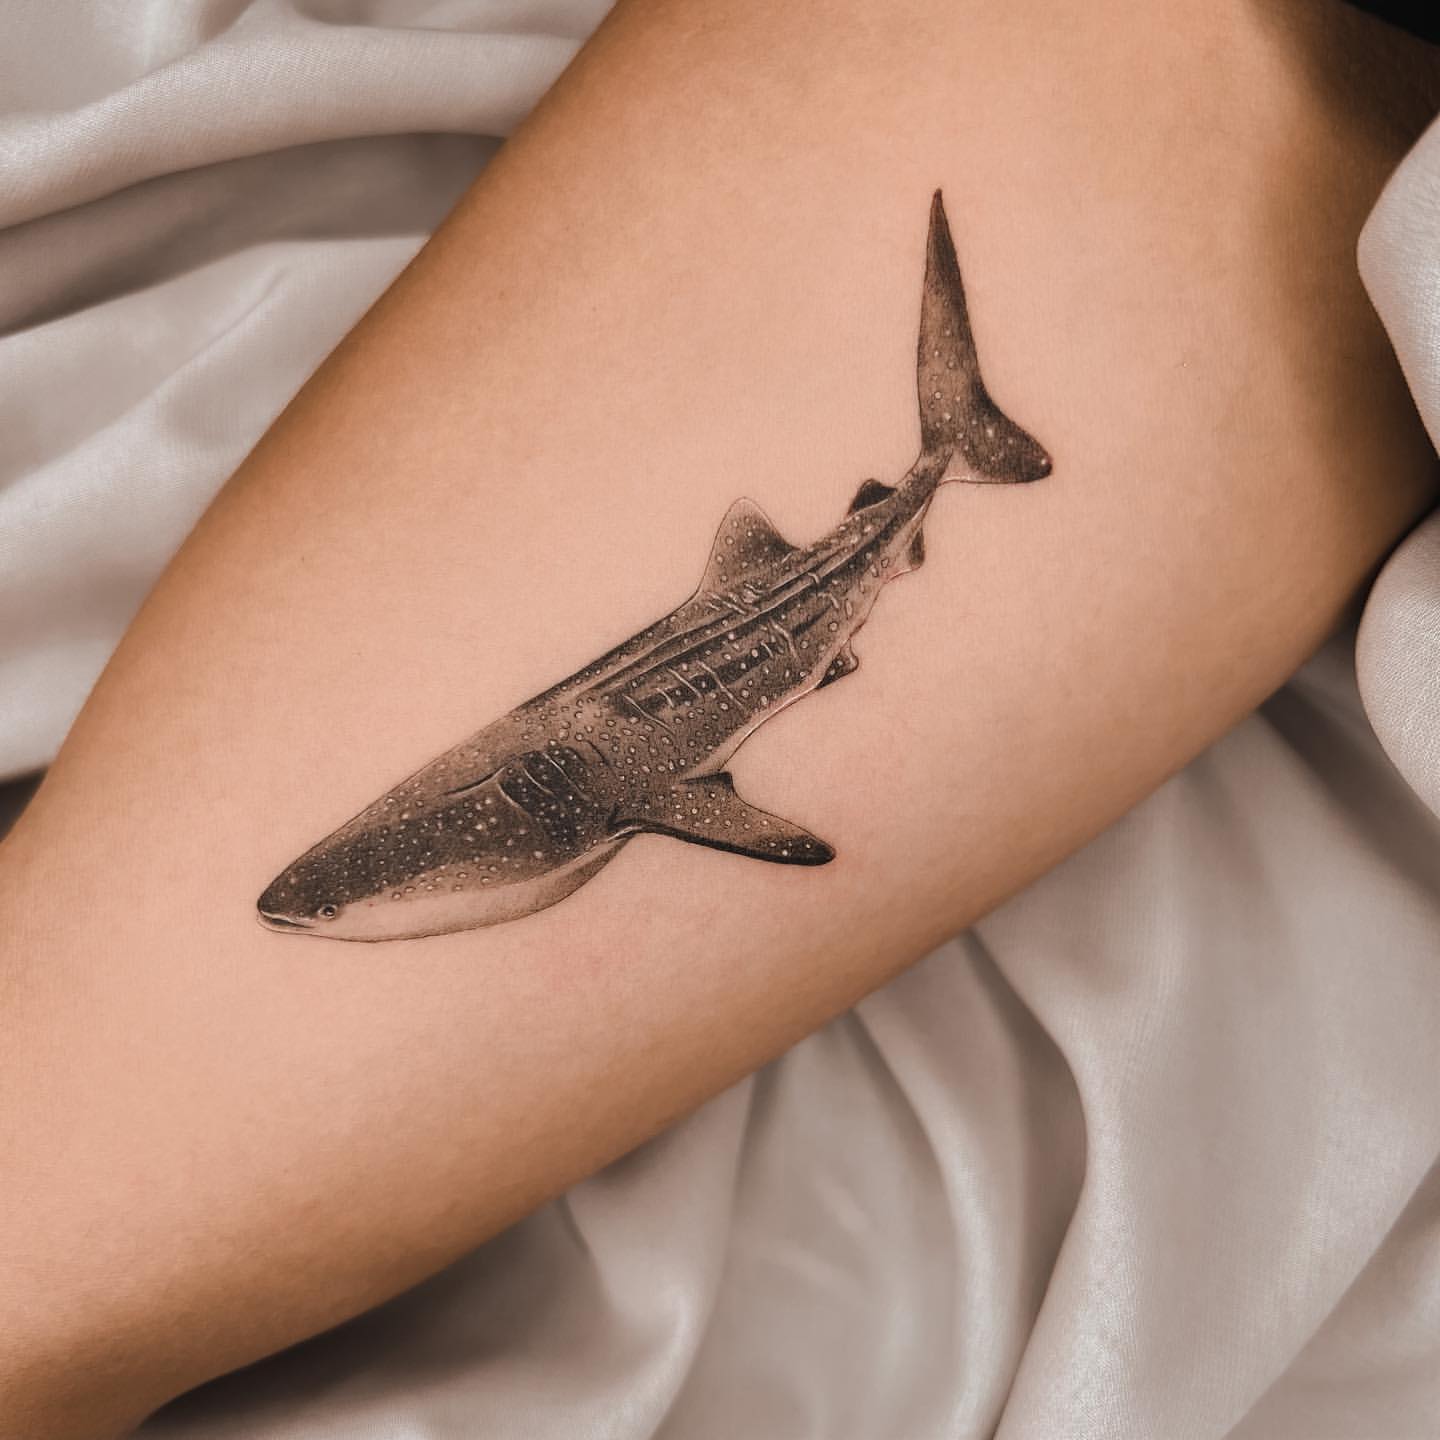 RIGGS' MONSTER TATTOO - #sharks by Scott Brown. We accept walk-ins 7 days a  week and now offering permanent cosmetics / microblading by Brandy . In  person deposit required for appointments 👽 | Facebook